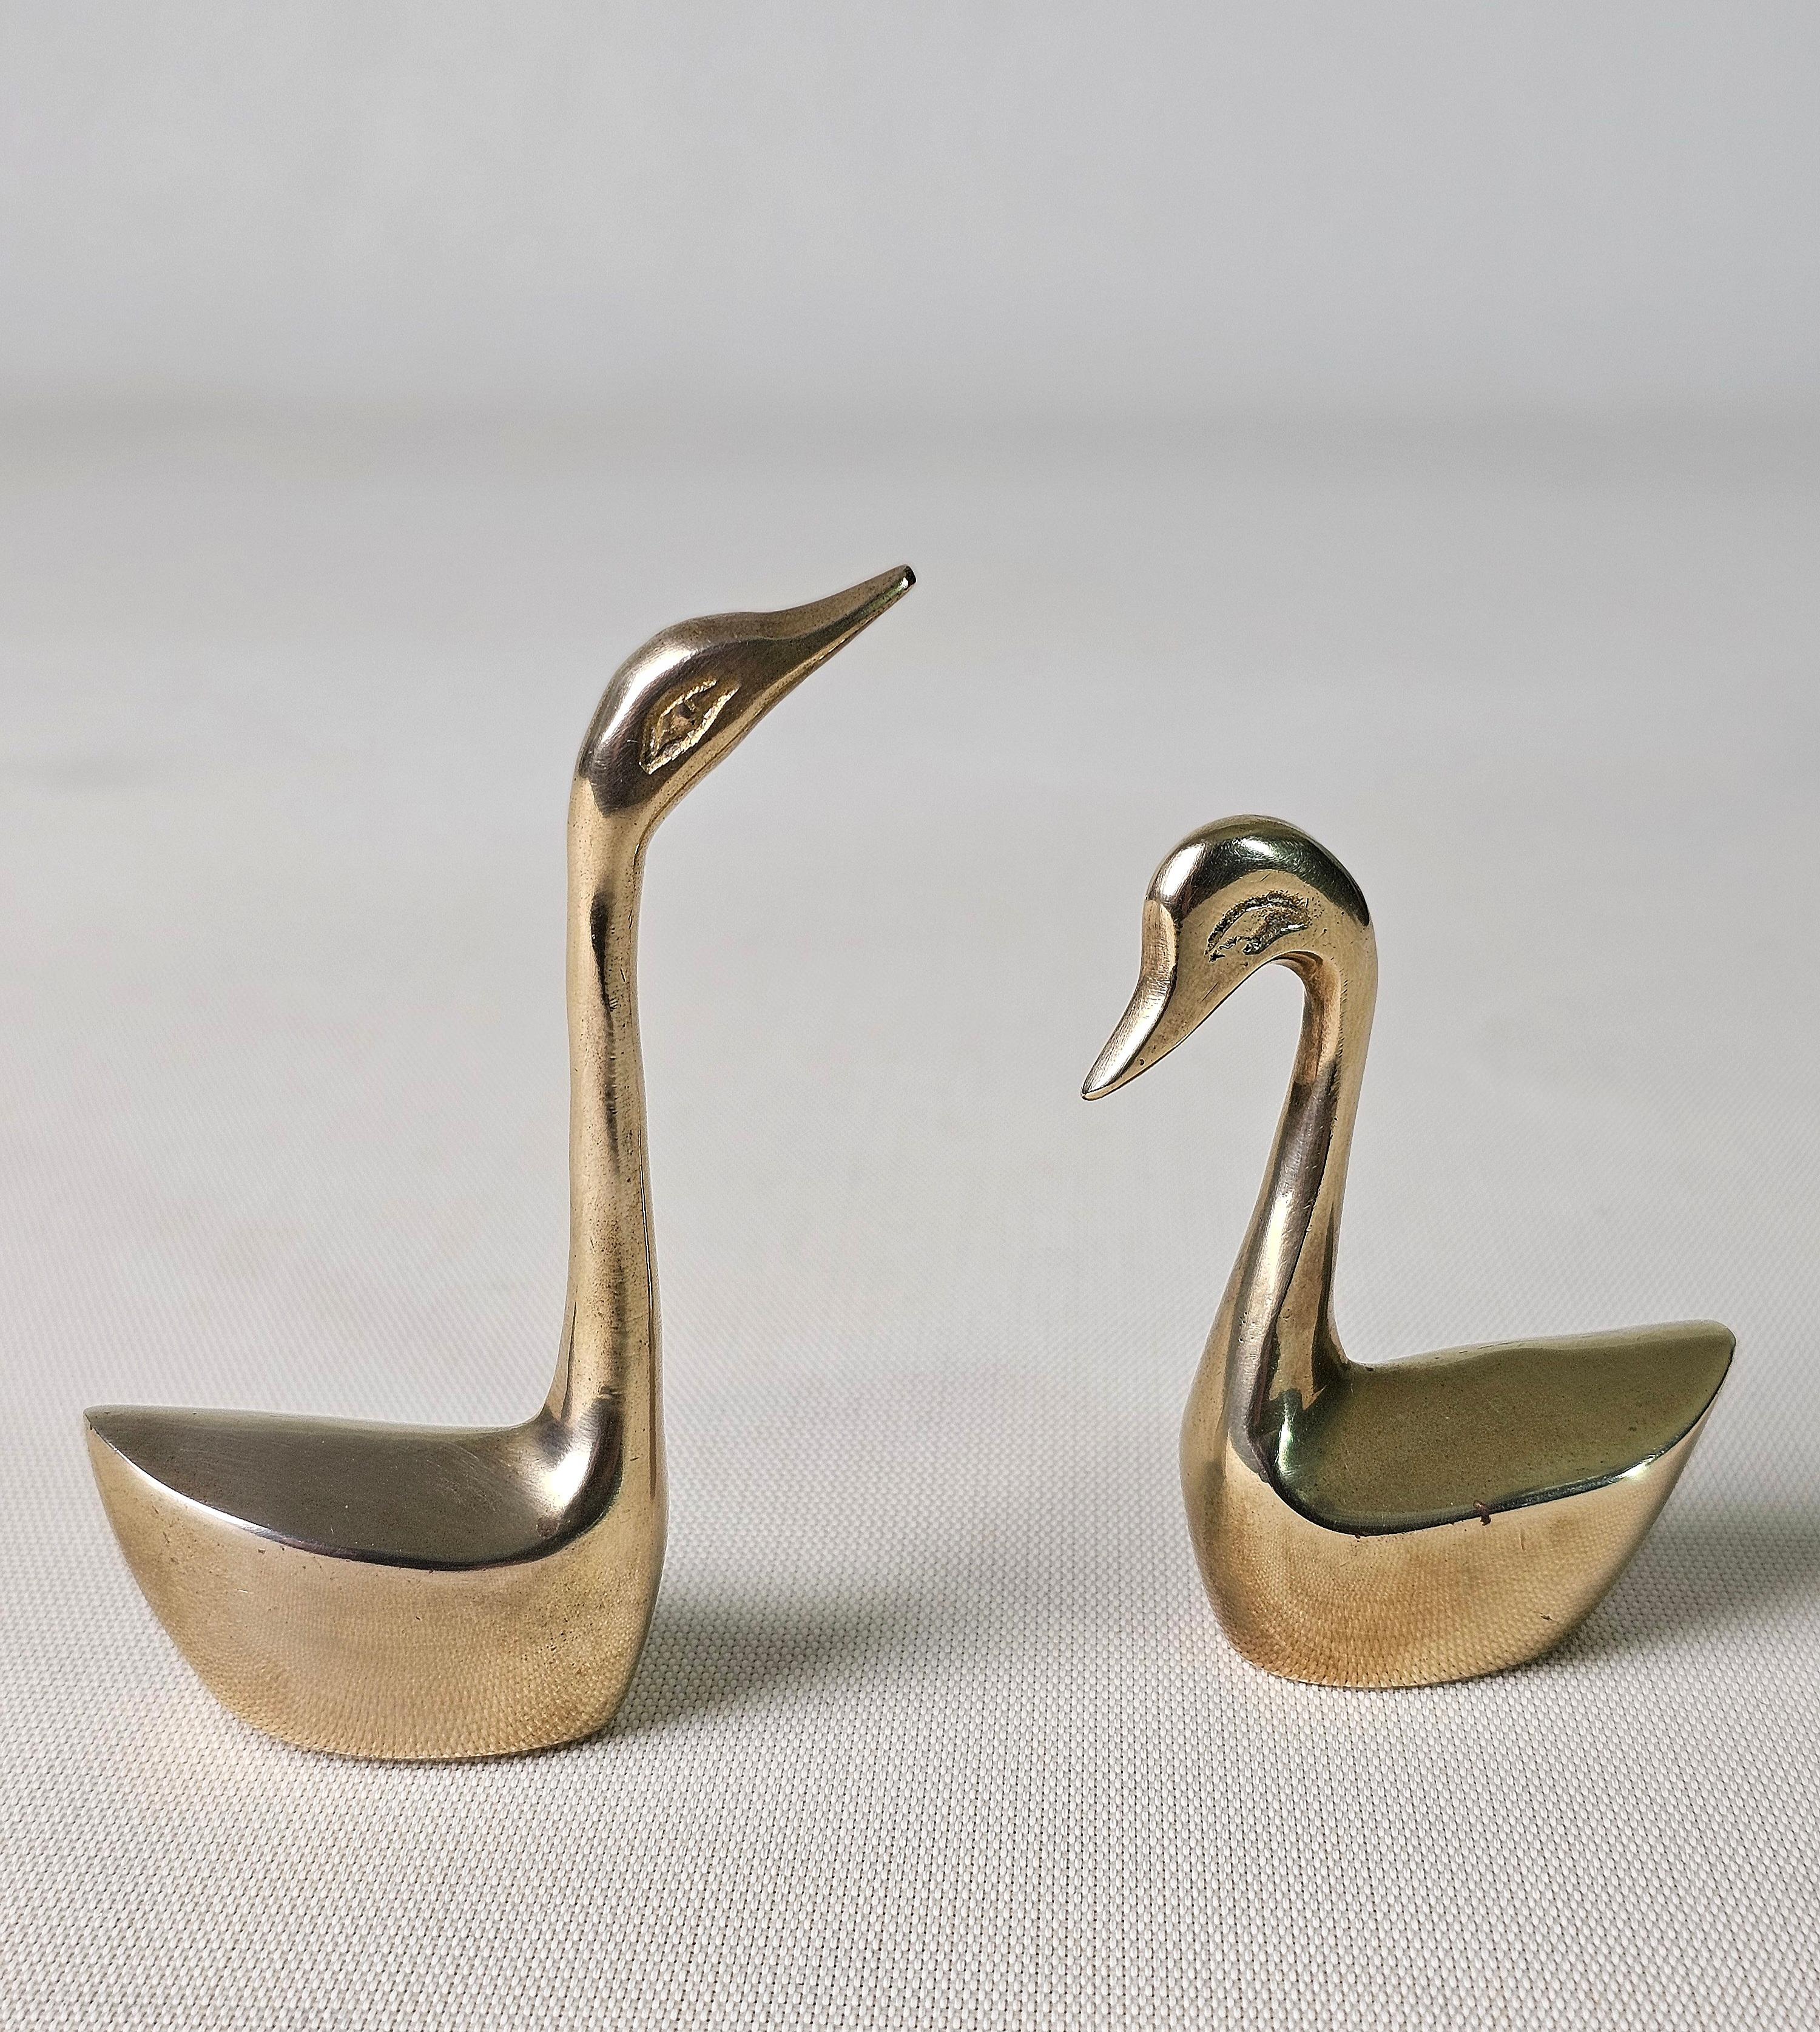 Two Brass Decorative Objects Midcentury Modern Italia 1960/70s For Sale 2